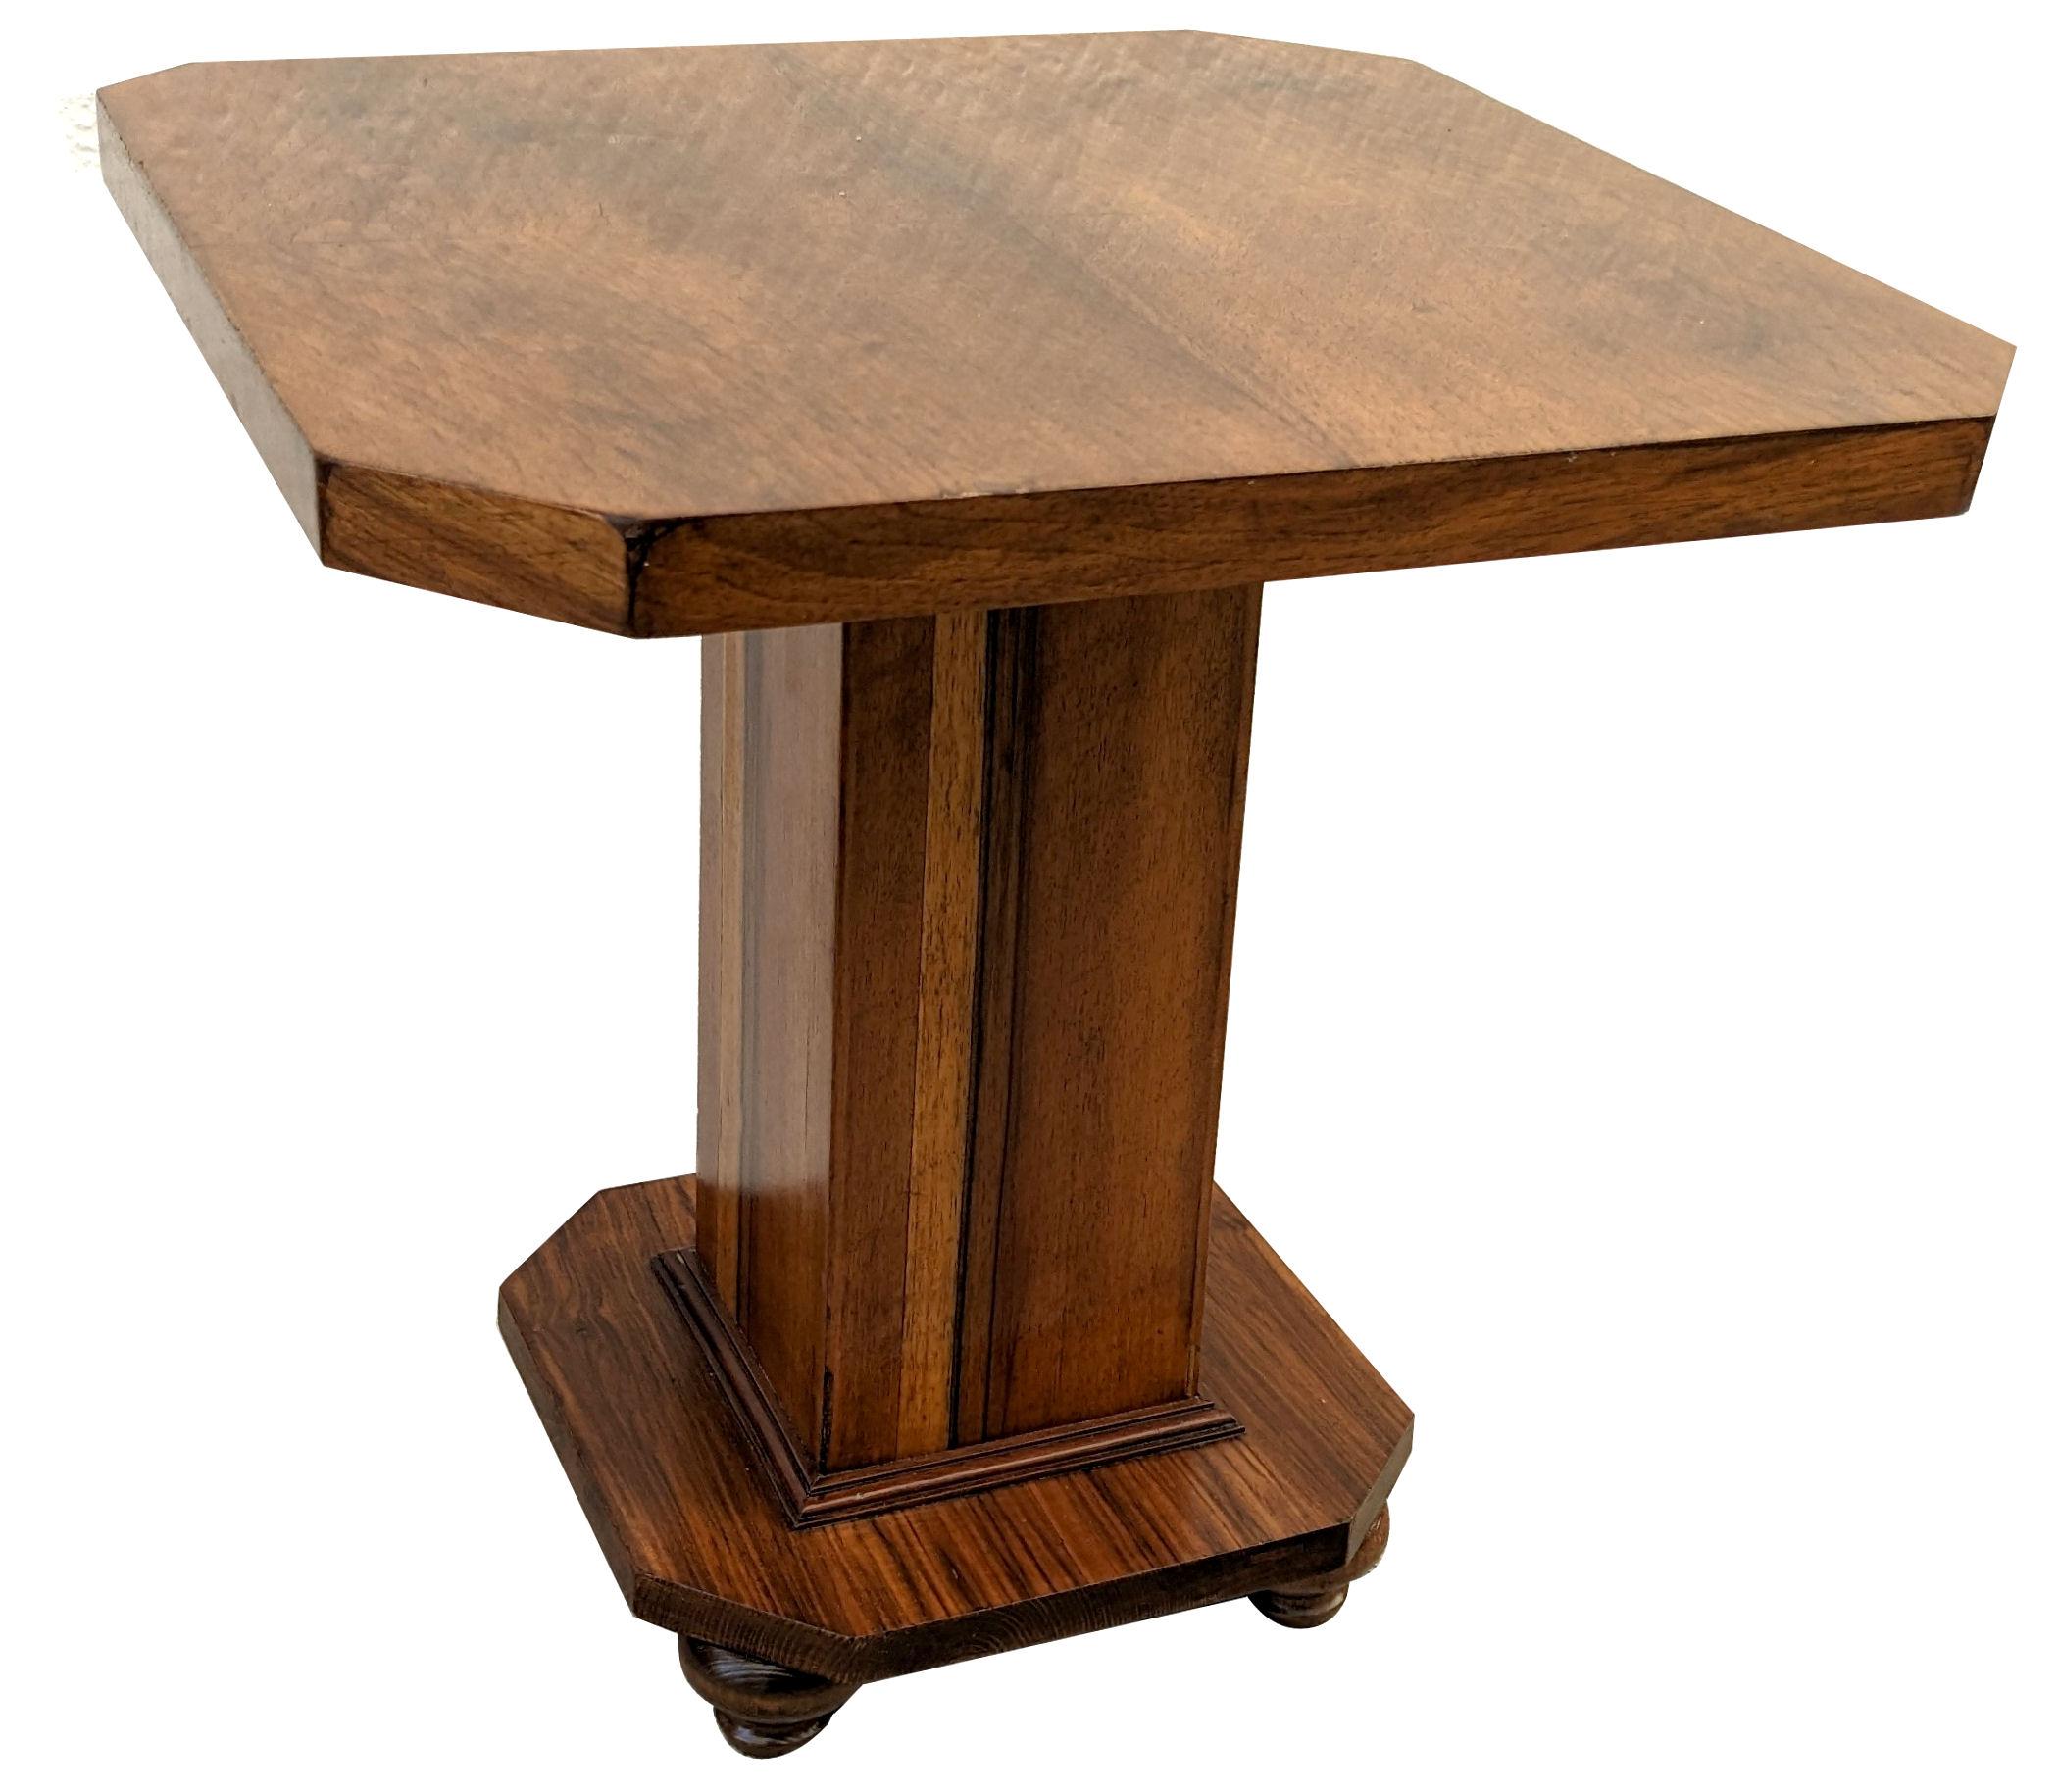 20th Century Art Deco Walnut Occasional Table, c1930s, English For Sale